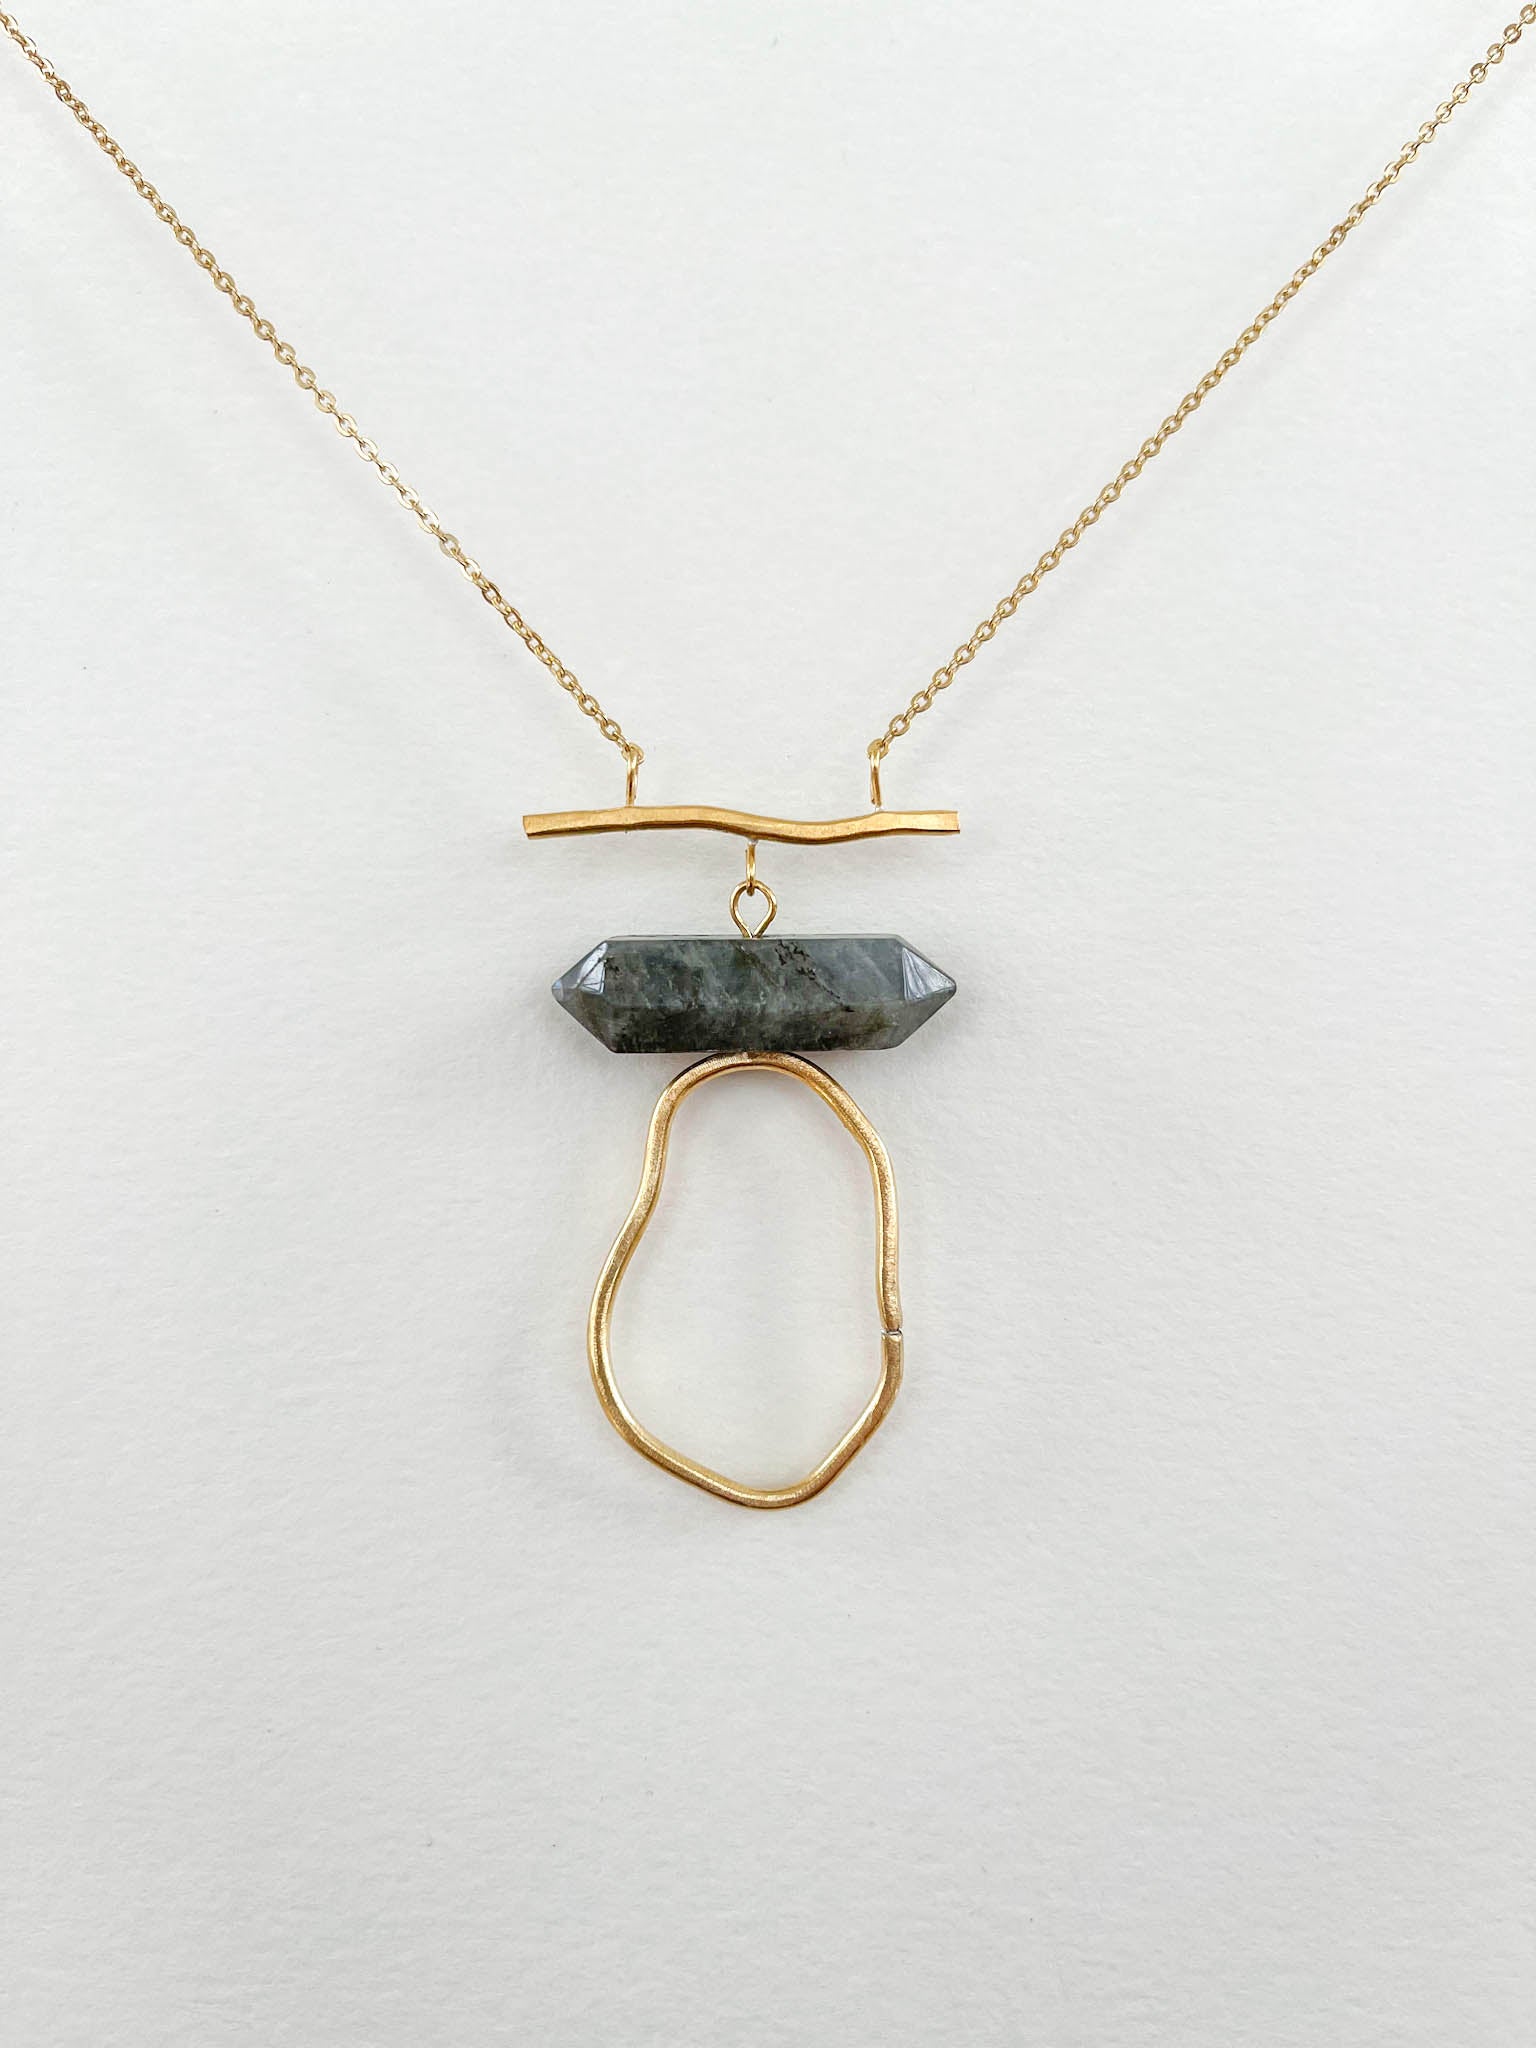 Long Free Form Necklace with Labradorite Point Accent